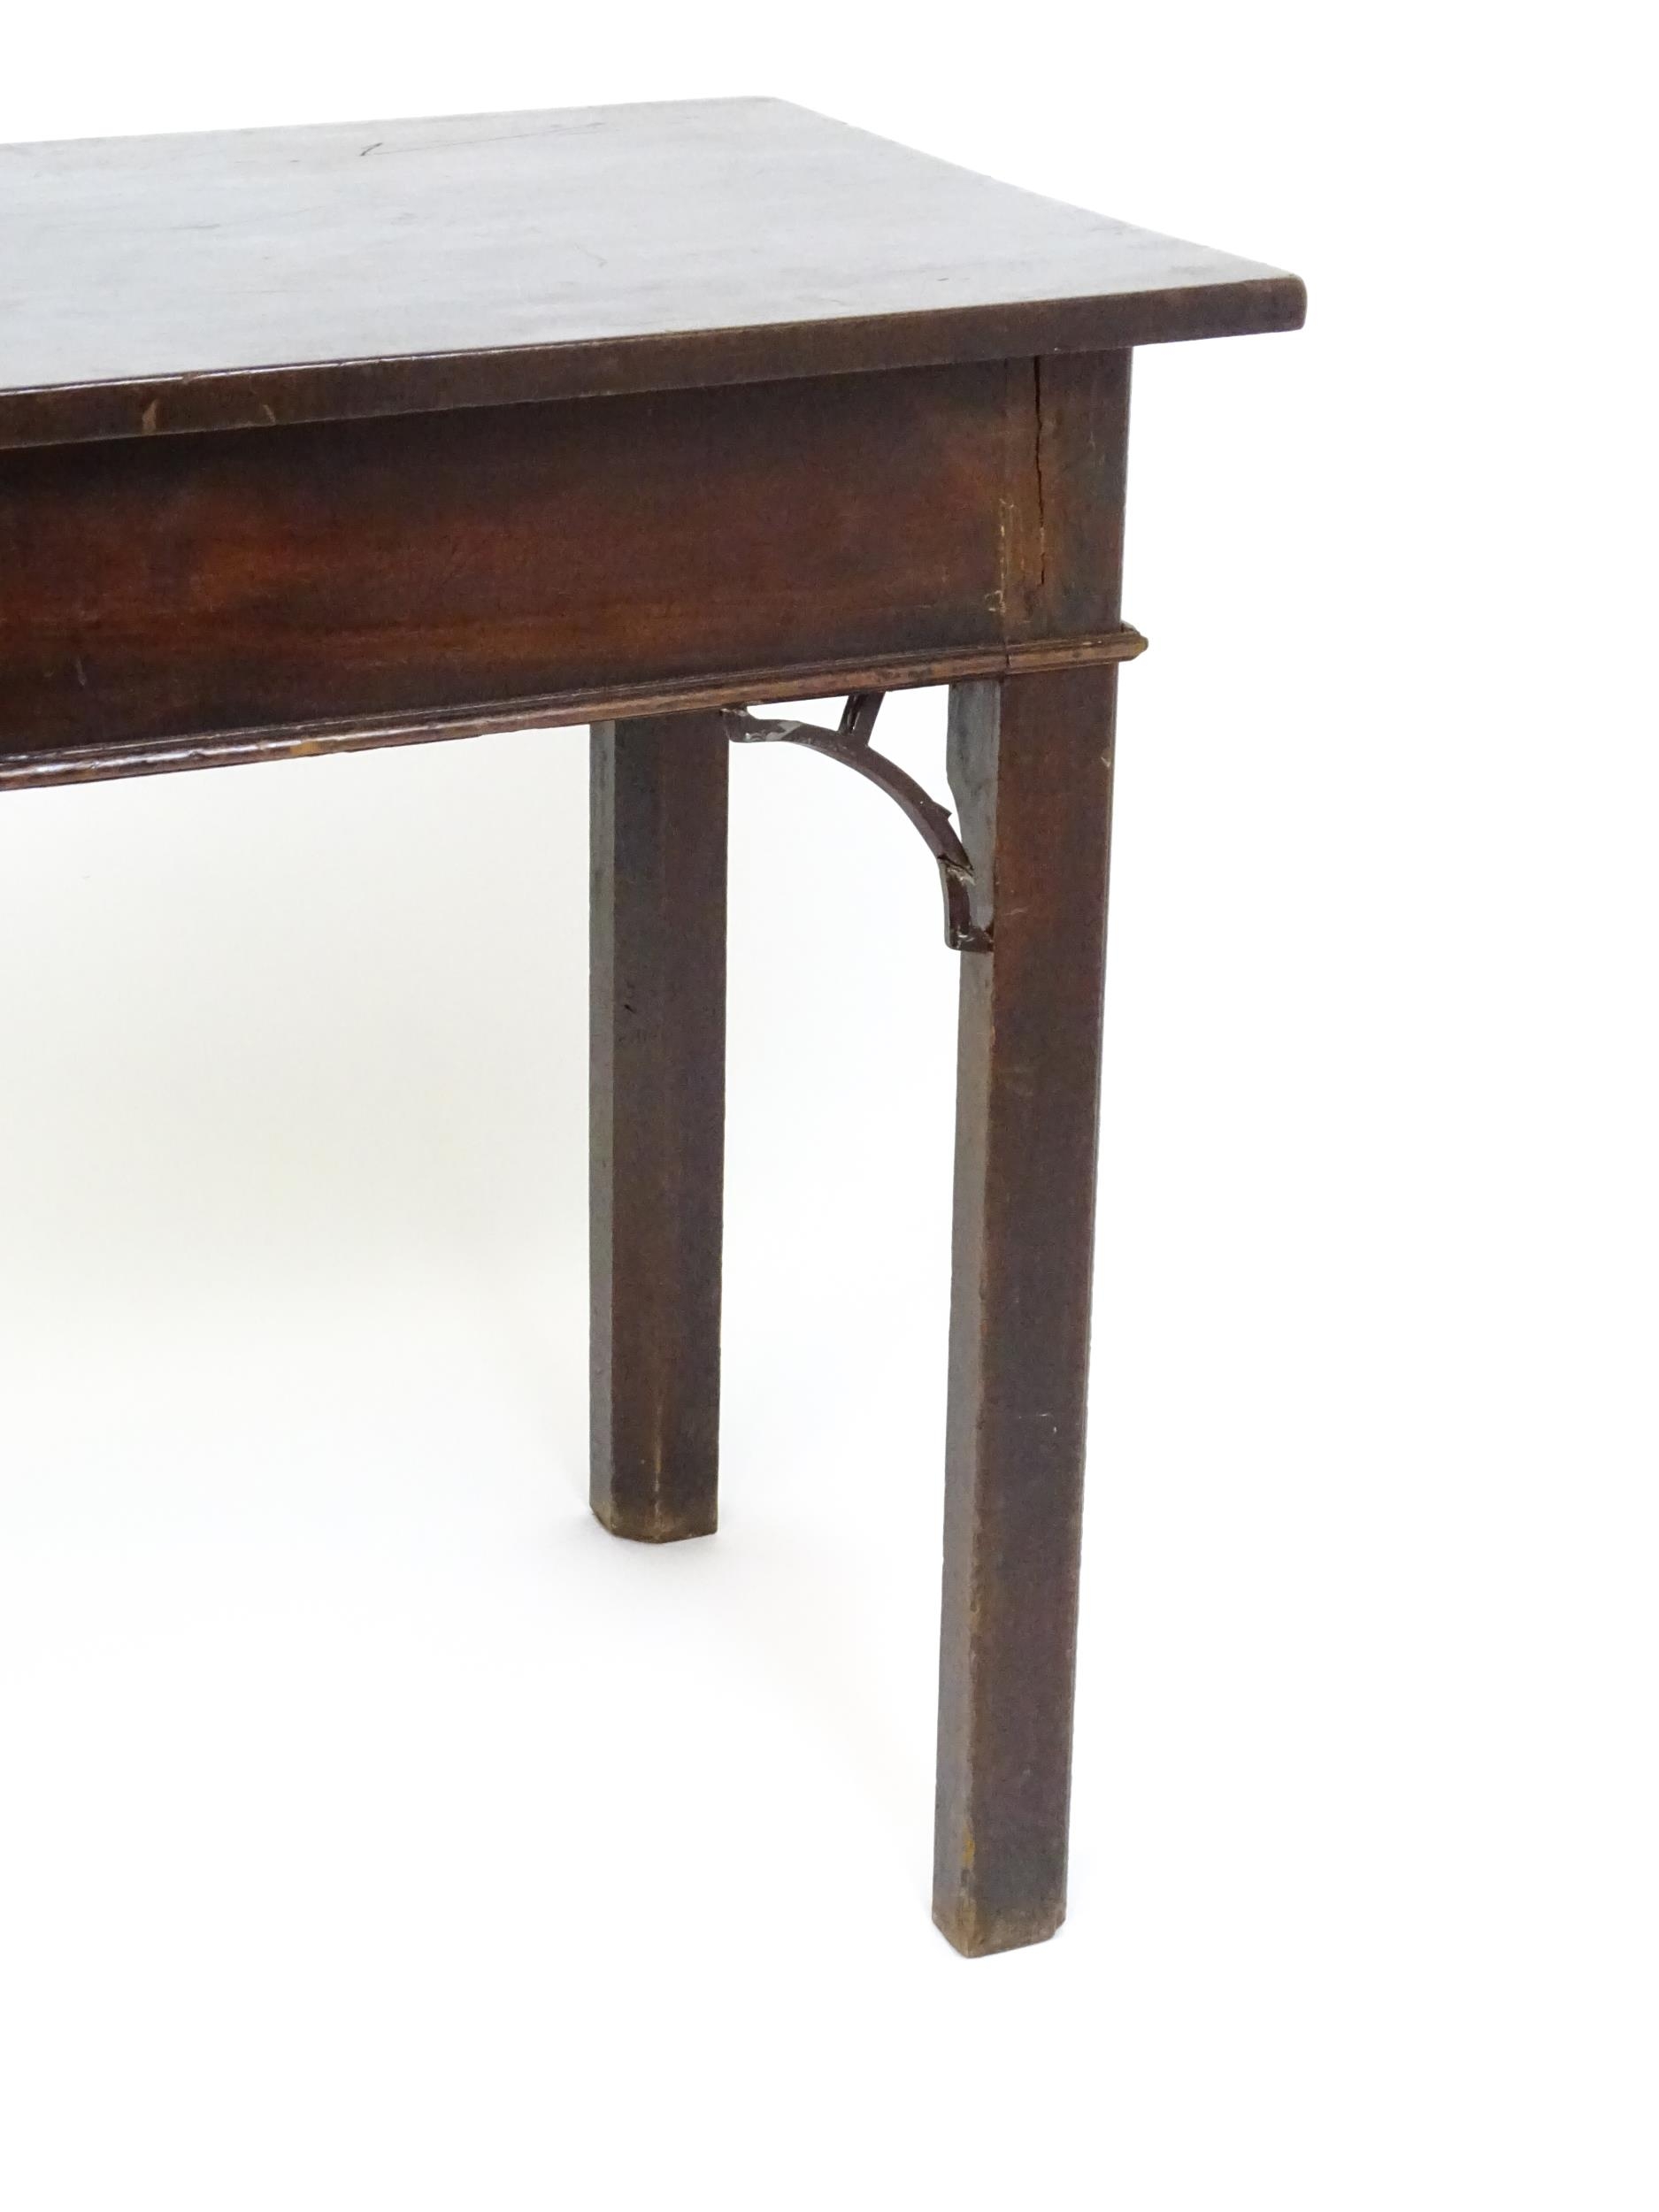 A late 18thC / early 19thC mahogany Chippendale style side table with brackets to the apron and - Image 3 of 9